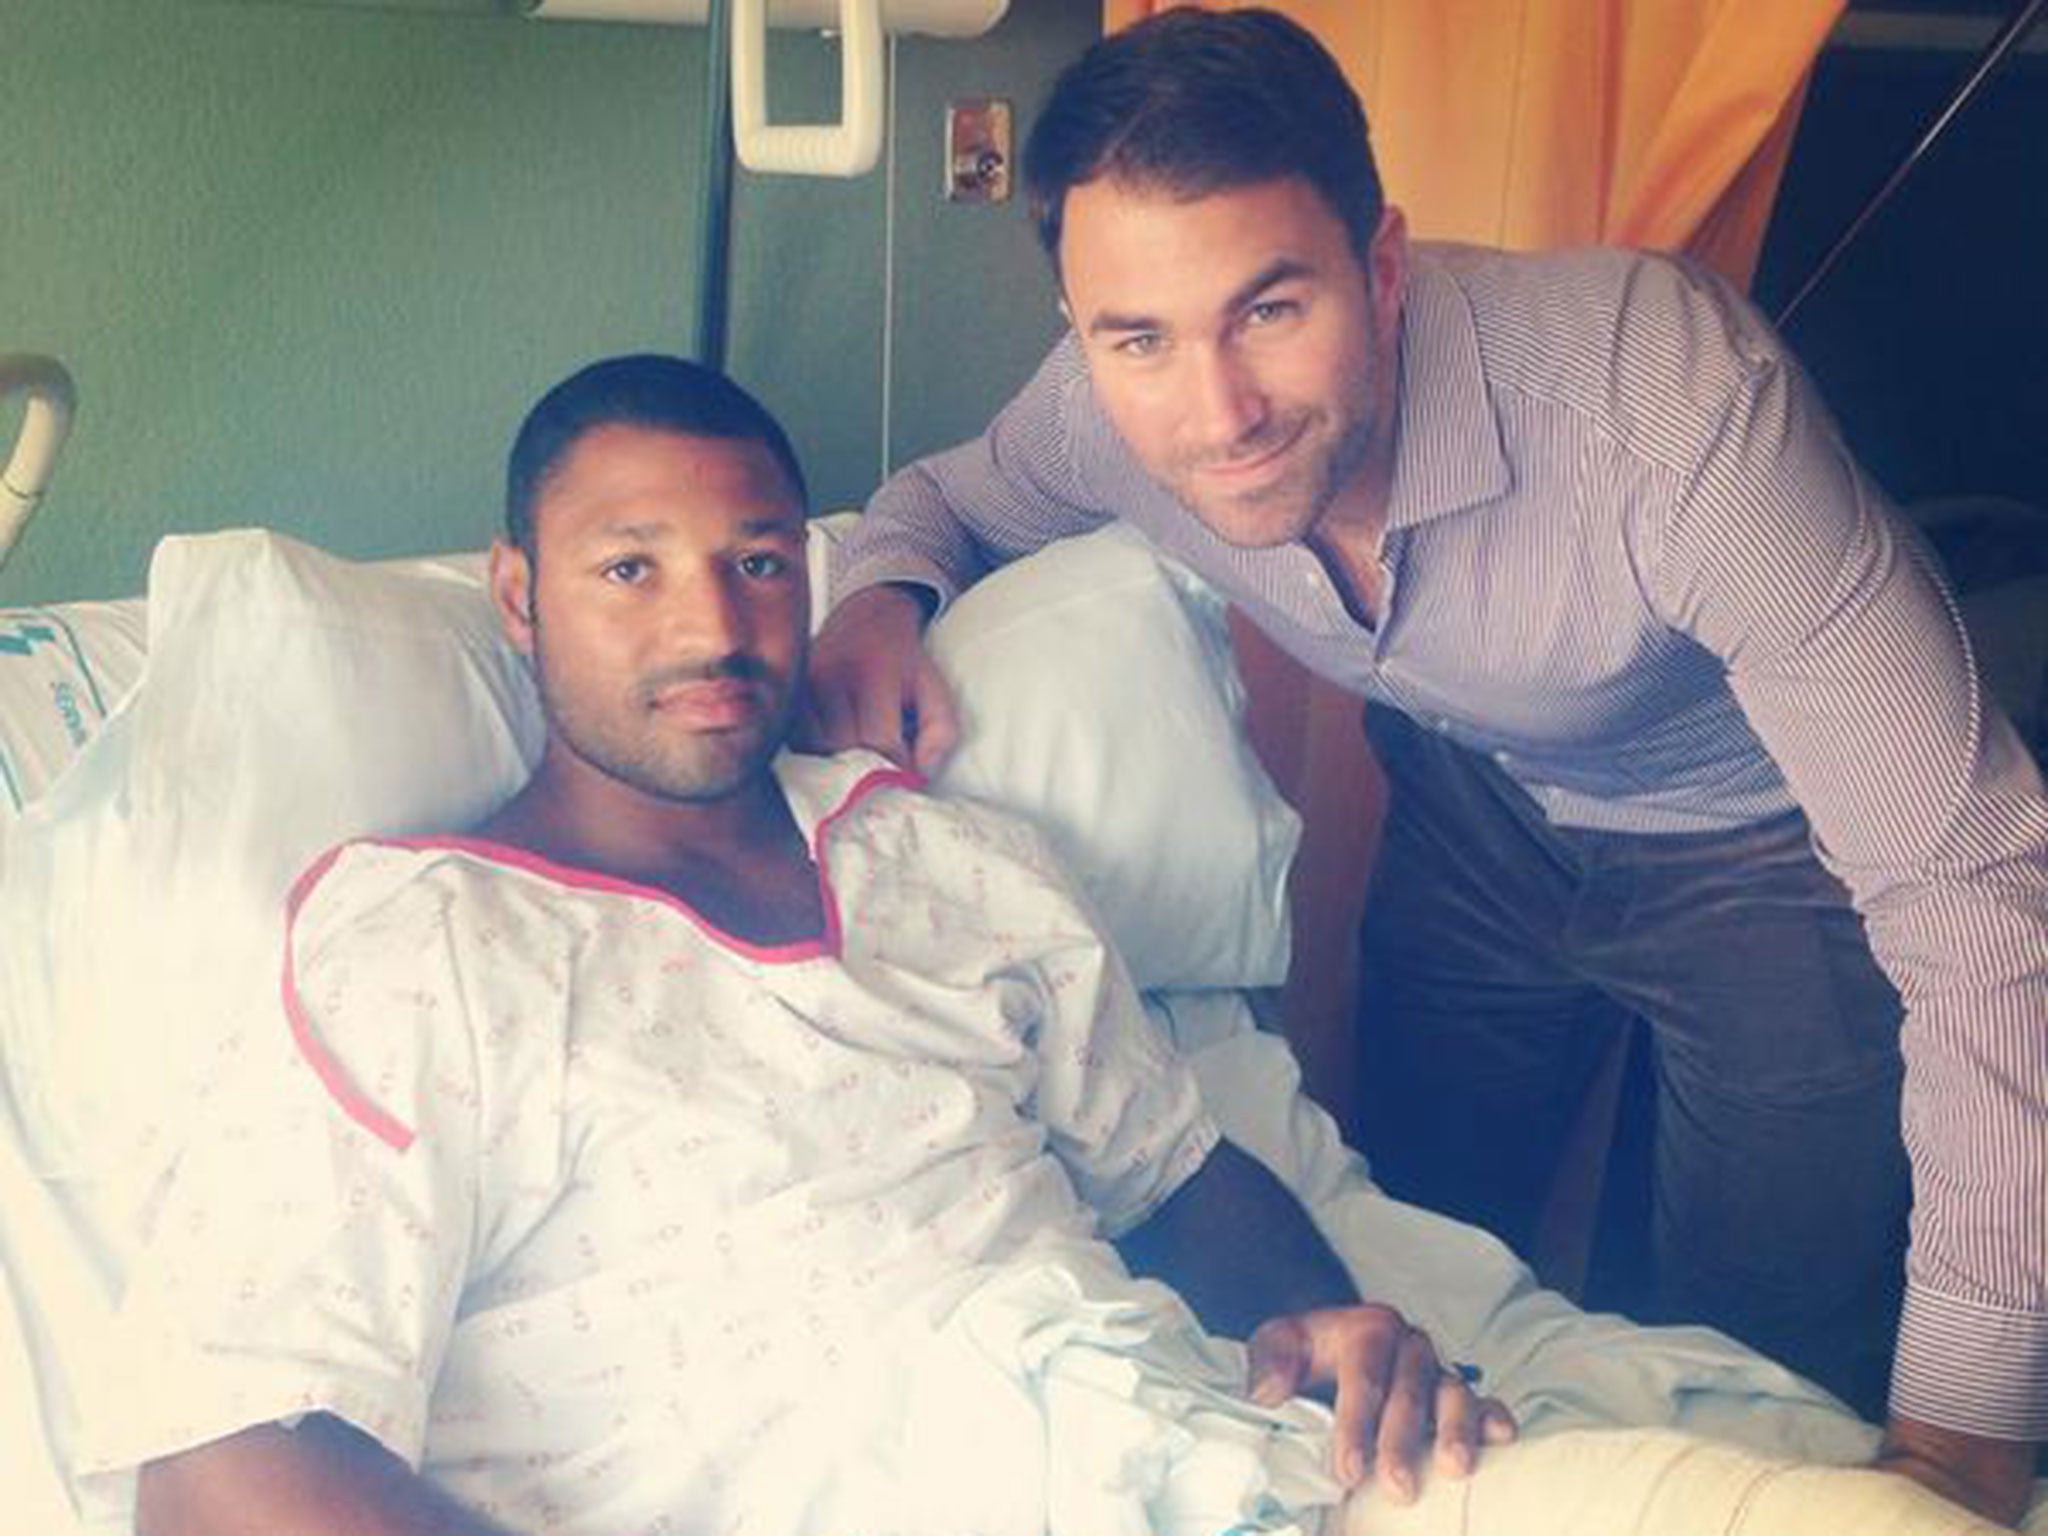 Eddie Hearn posted a picture alongside Kell Brook as the IBF world champion recovers from being stabbed in the leg